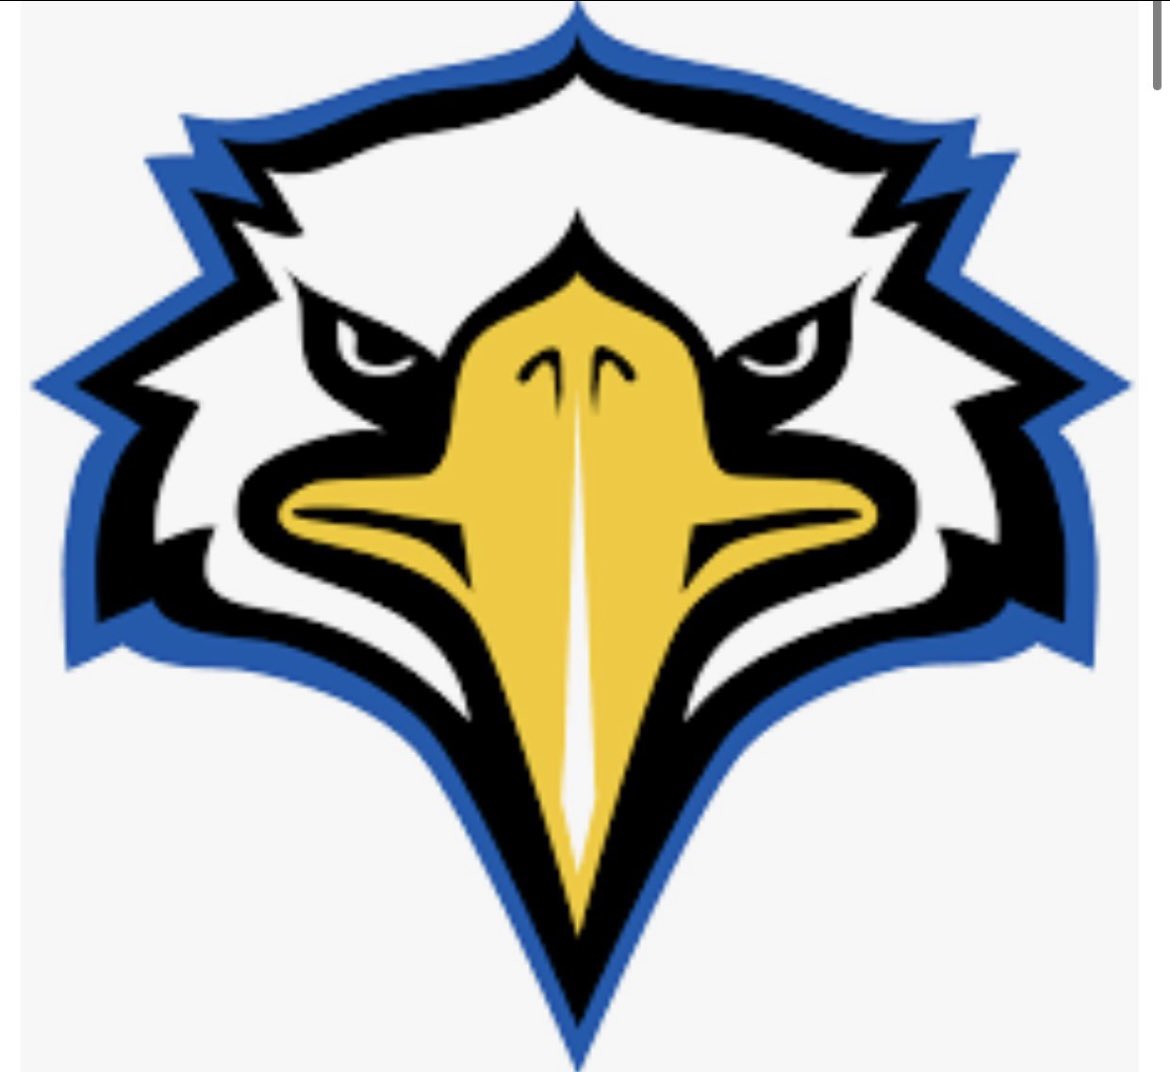 After a great conversation with @CoachEverhart , I am blessed to receive my first D1 offer from Morehead State ! @MSUEaglesFB @TCHSTorosFB @ZachHarbison @KevinJDoelling @coachturpen